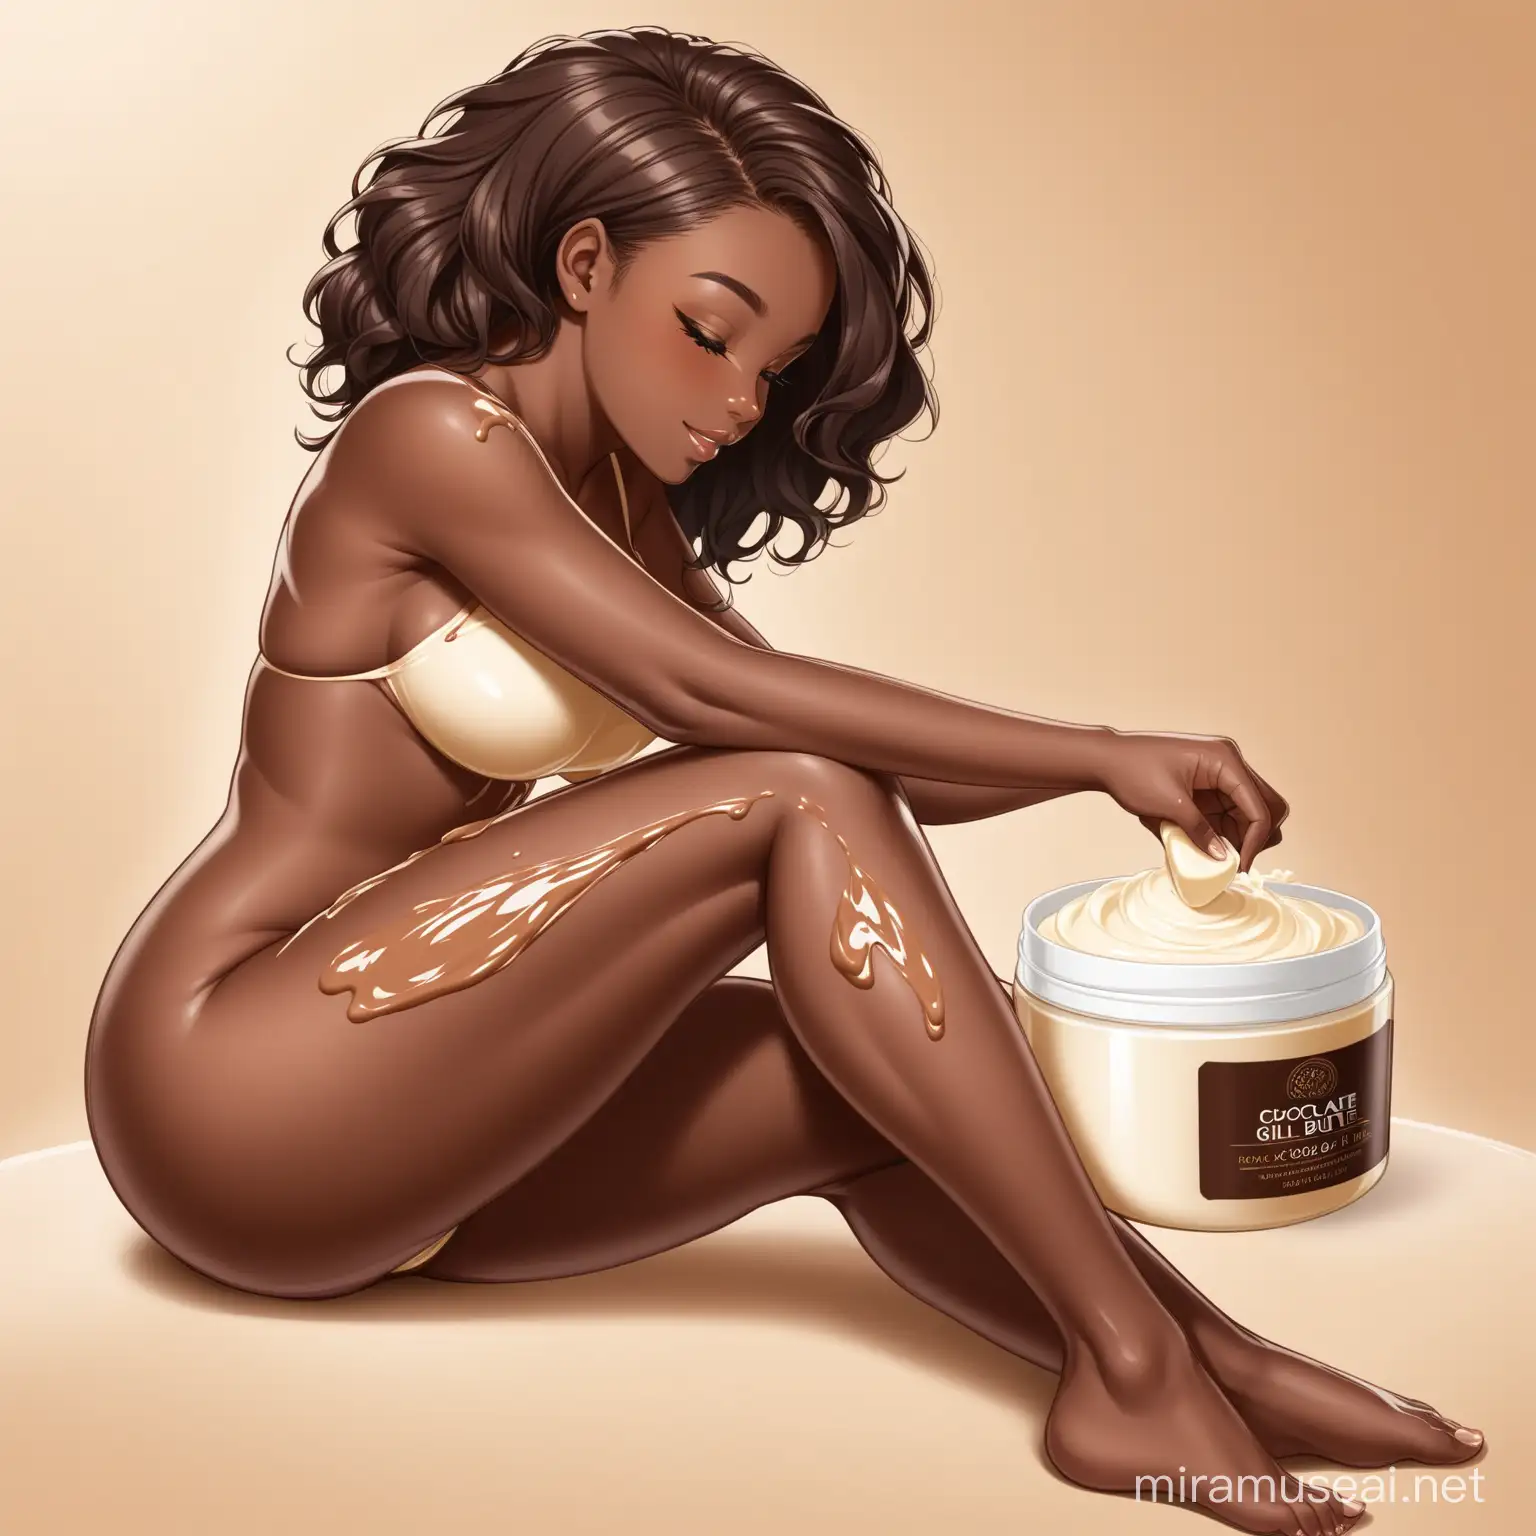 Thick chocolate skin girl applying body butter to her legs